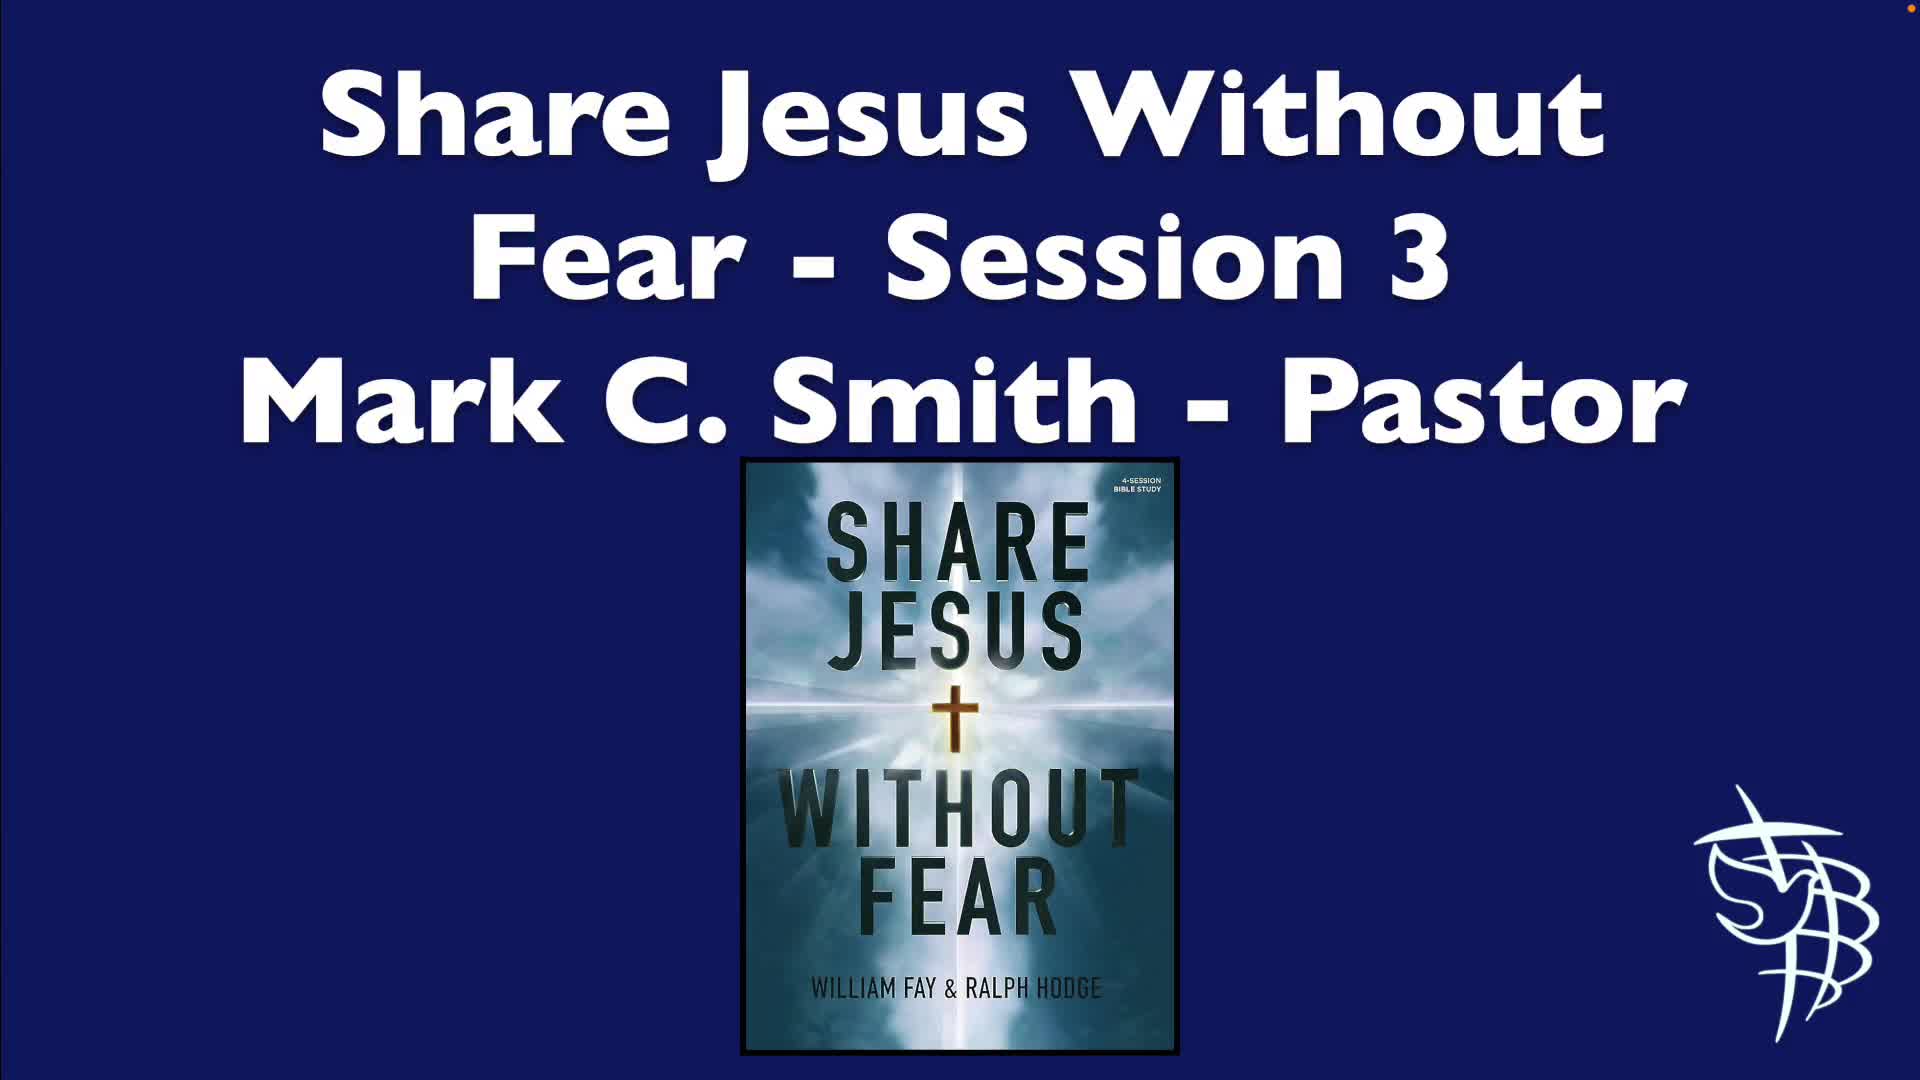 Share Jesus Without Fear - Session 3